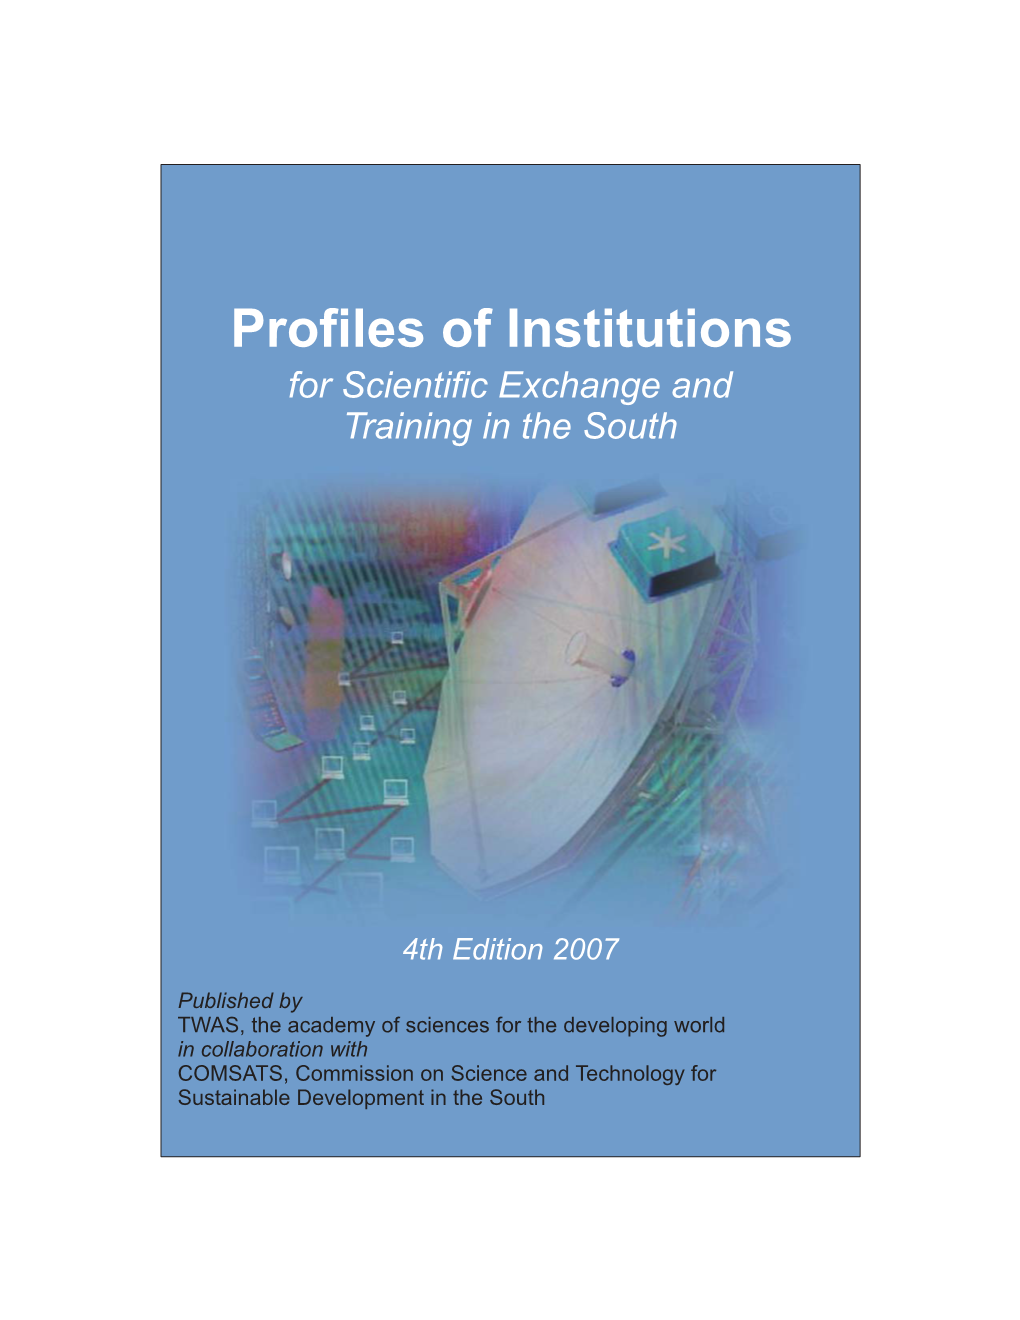 Profiles of Institutions for Scientific Exchange and Training in the South